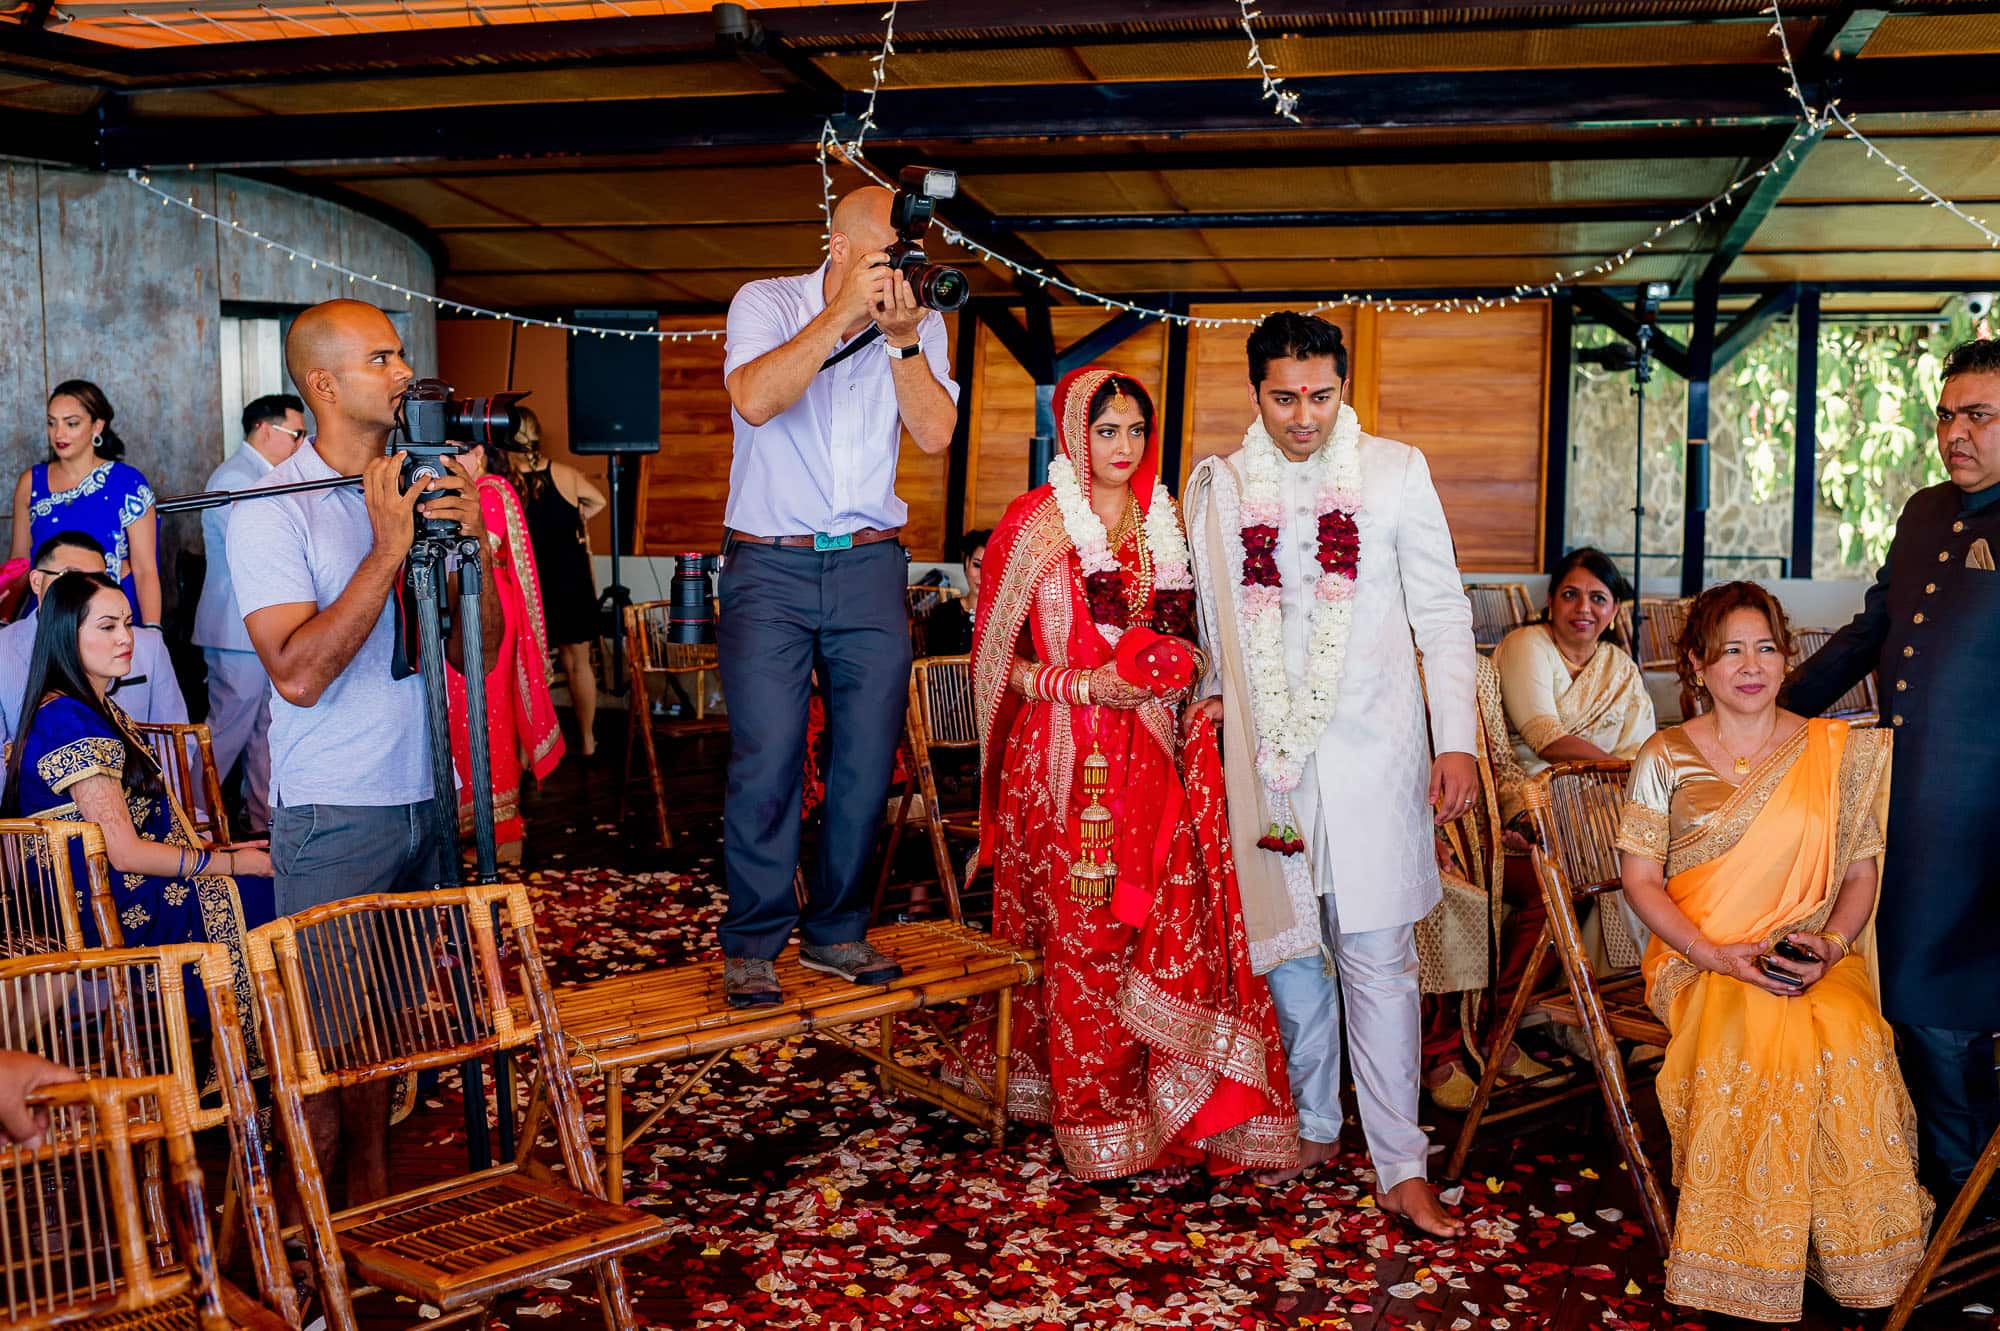 Photographing a traditional Hindu Muslim wedding is no small feat